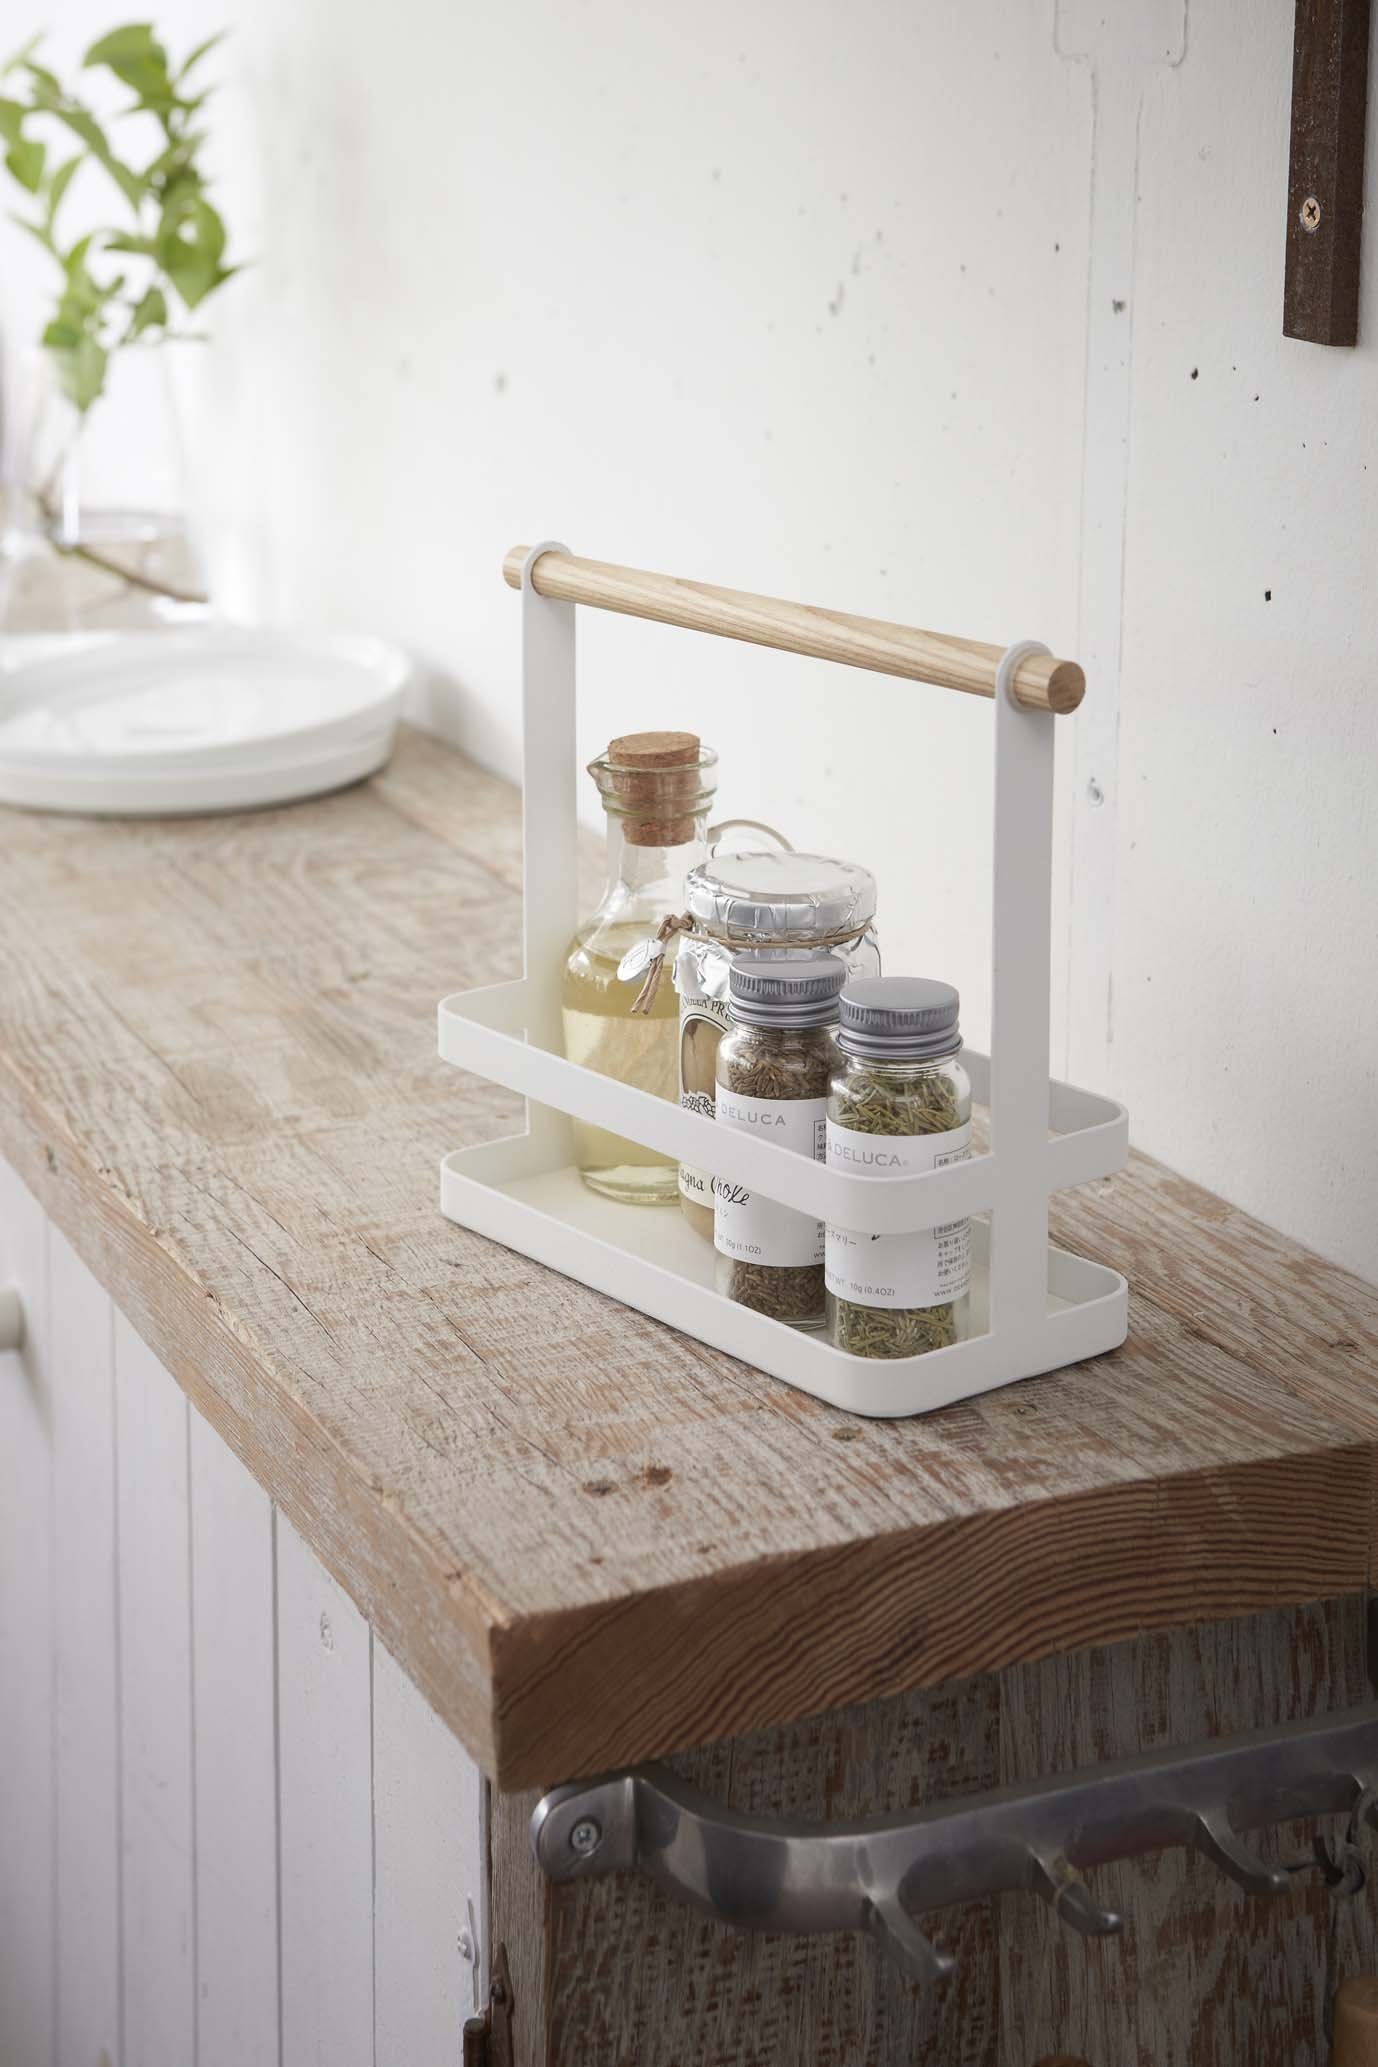 White metal spice rack holding spice canisters on a kitchen countertop